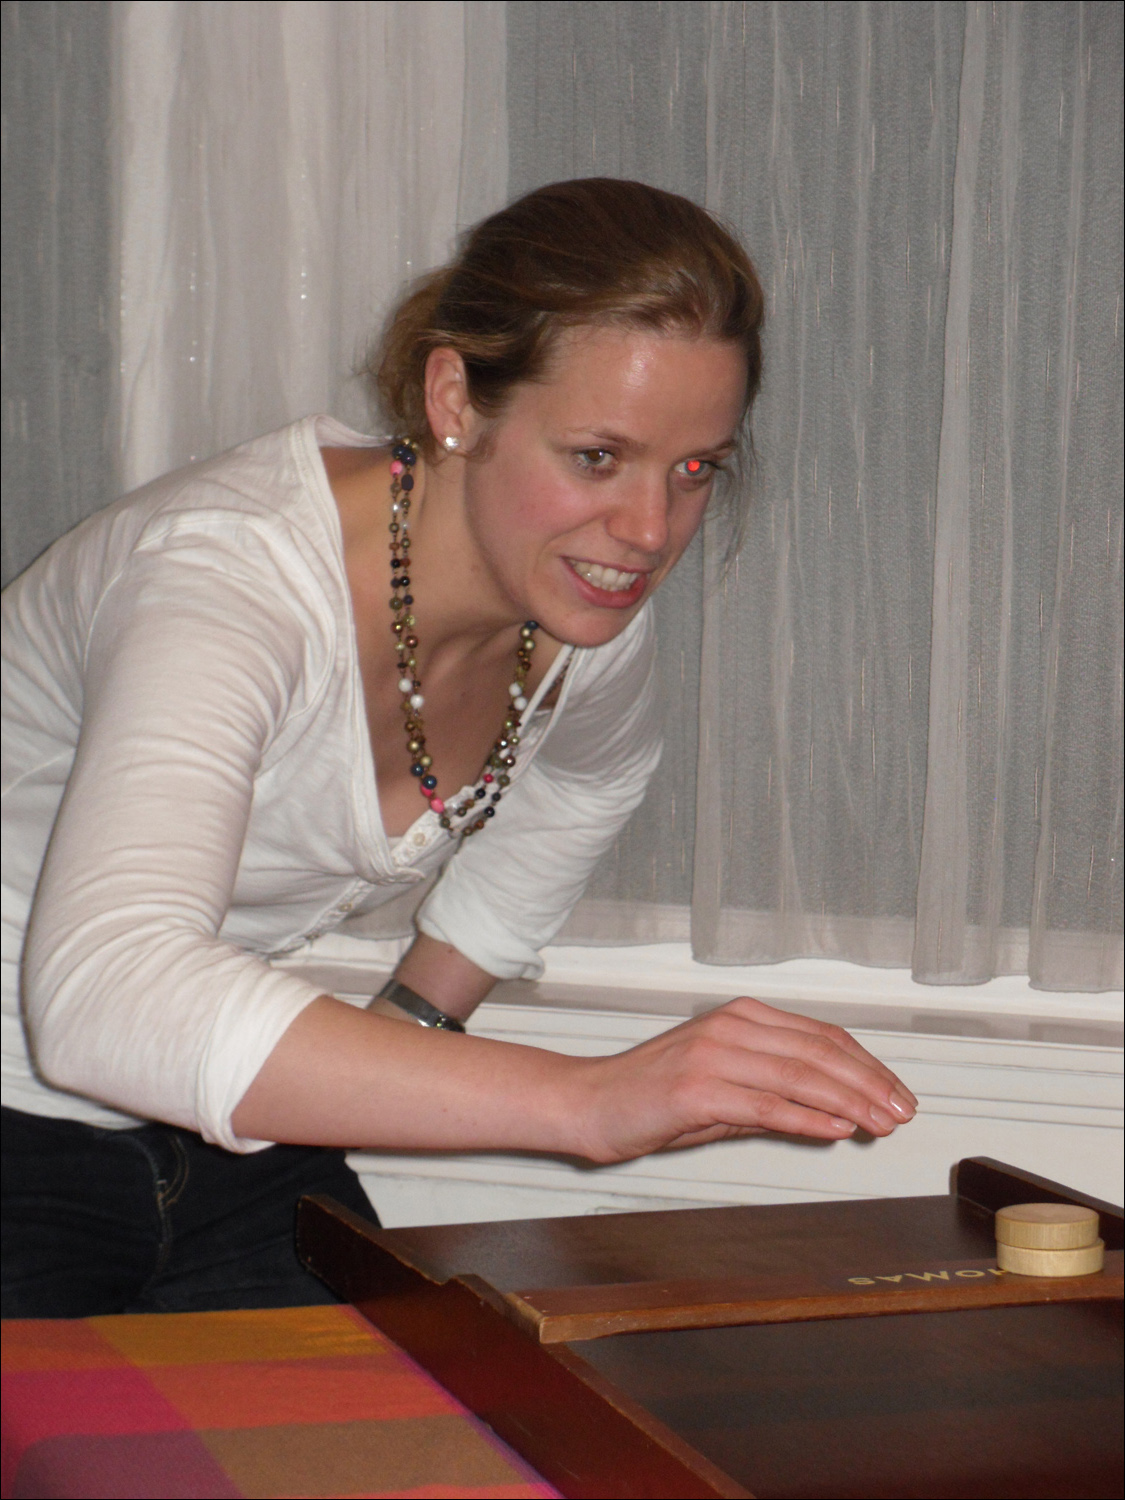 Dutch dinner and game night at home of Martijn and Joseba- Anna Colvin takes her turn